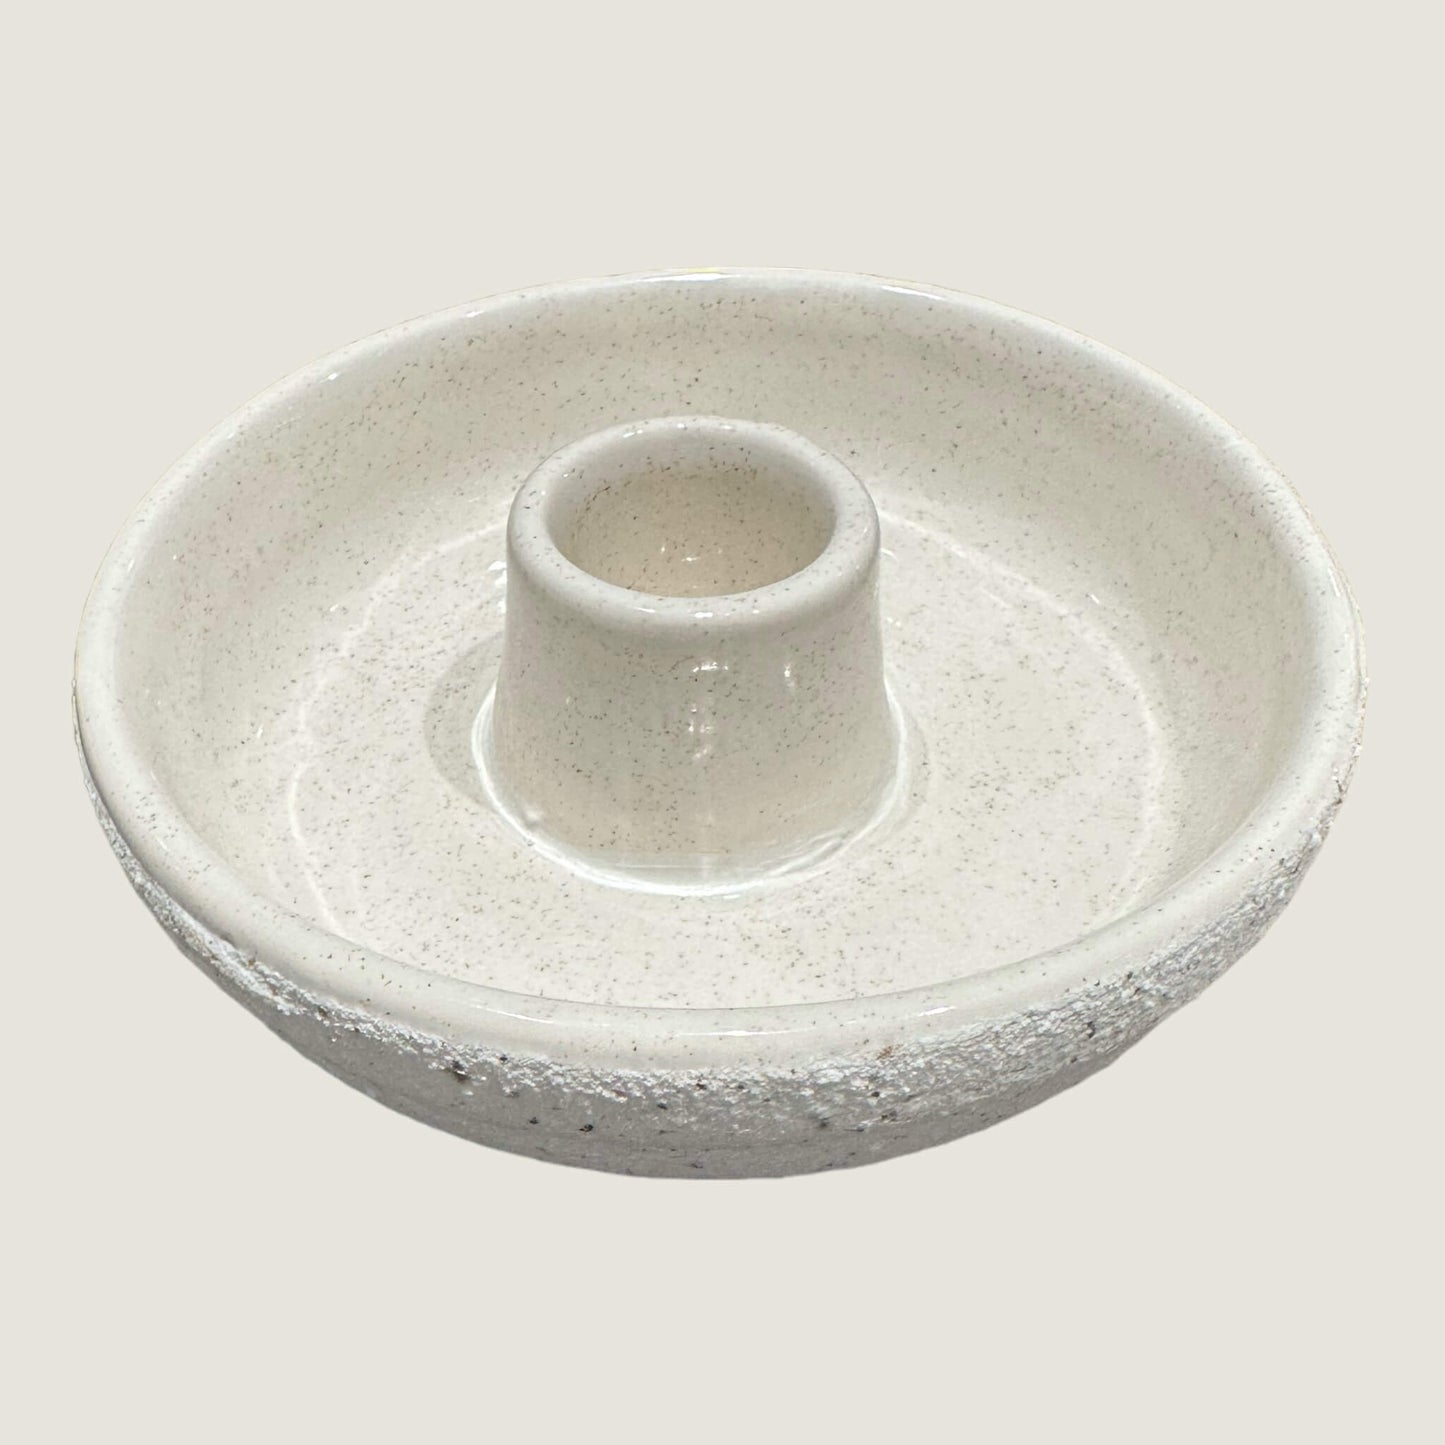 Alt text for the image showing the white speckled ceramic dish on its own: A white speckled ceramic dish, 11cm in diameter and 3.7cm in height. Ideal for holding Palo Santo sticks and capturing ash.